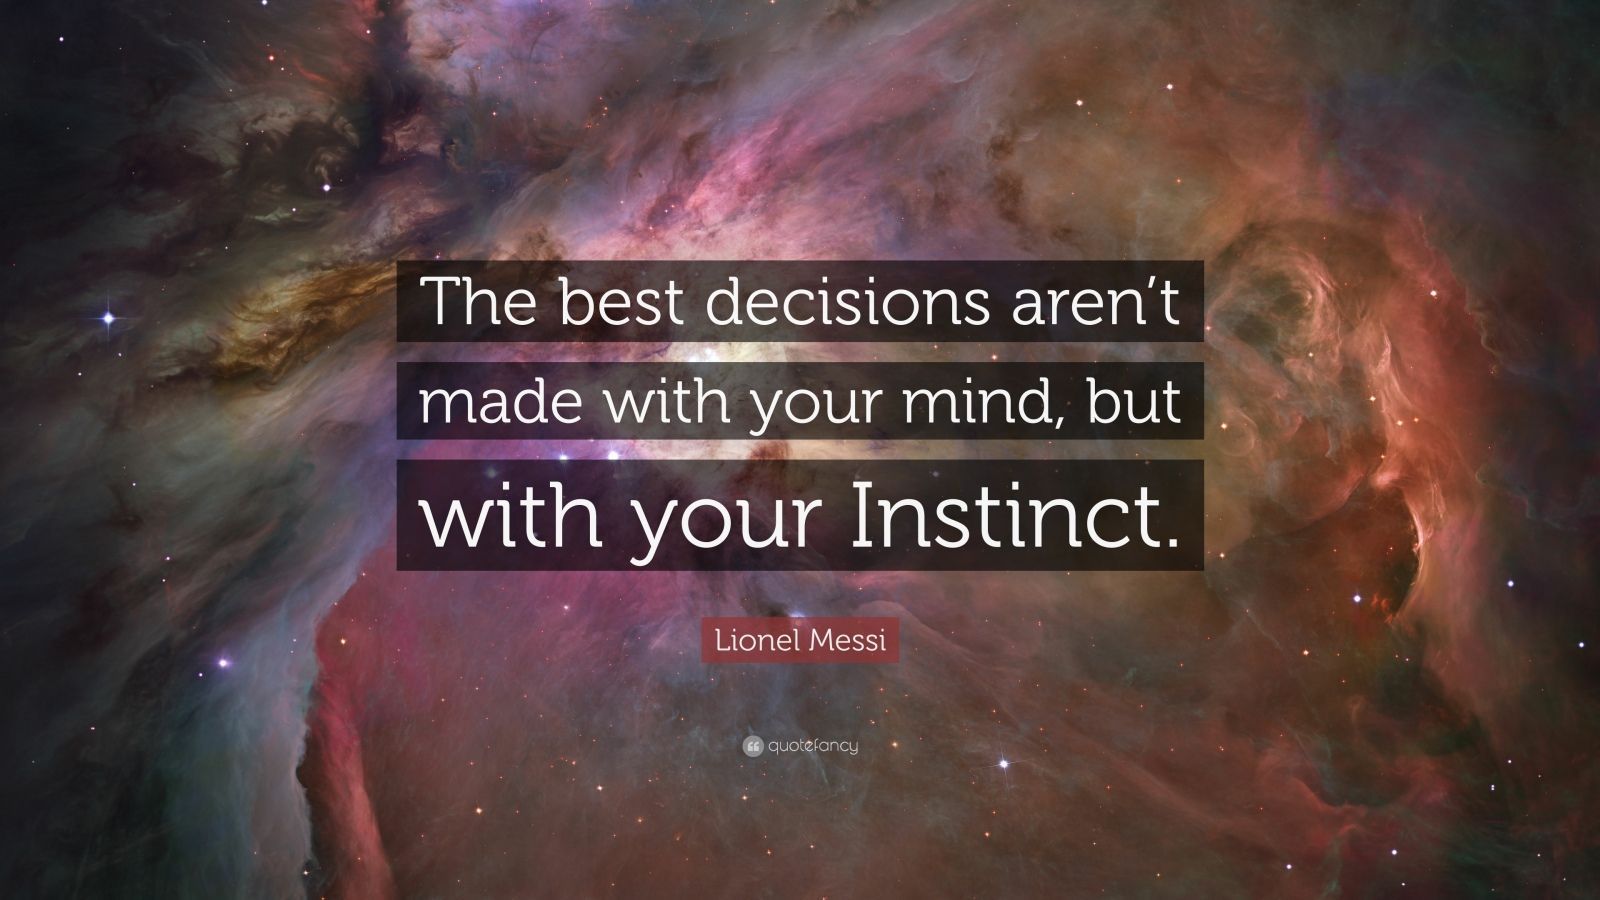 Lionel Messi Quote: “The best decisions aren't made with your mind